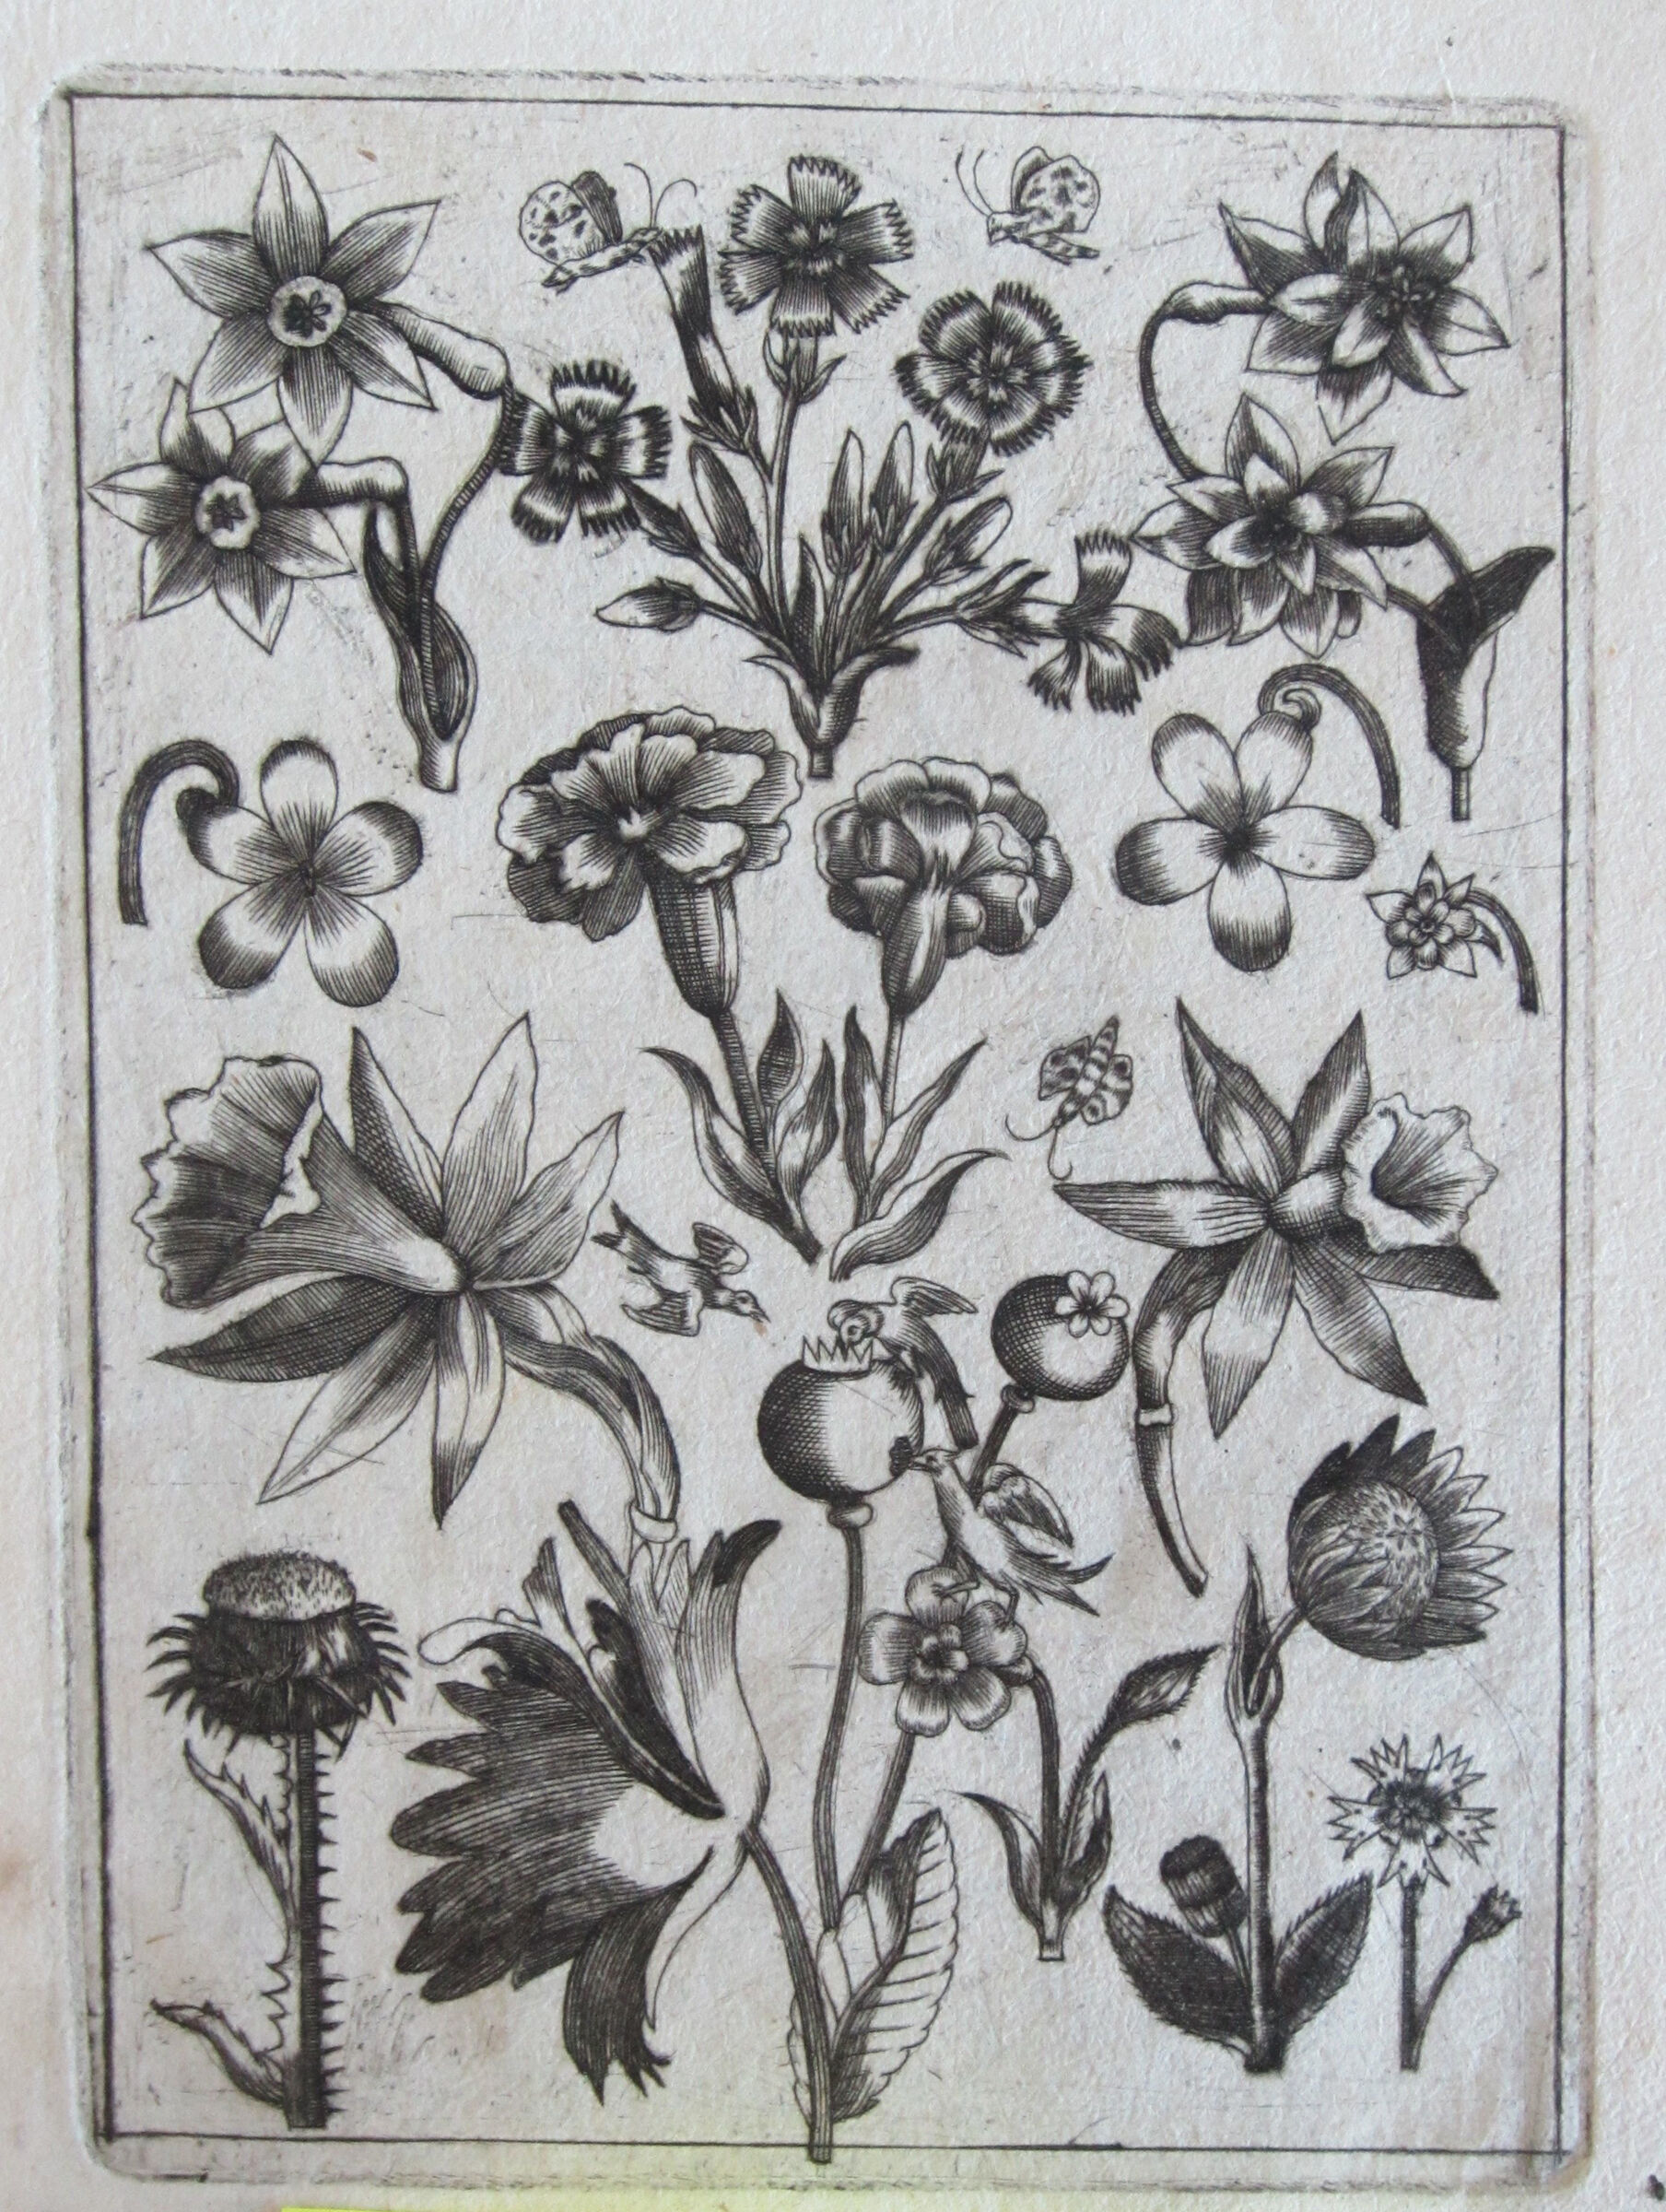 Flowers, Insects, And Birds, With Pinks And Butterflies At The Upper Center